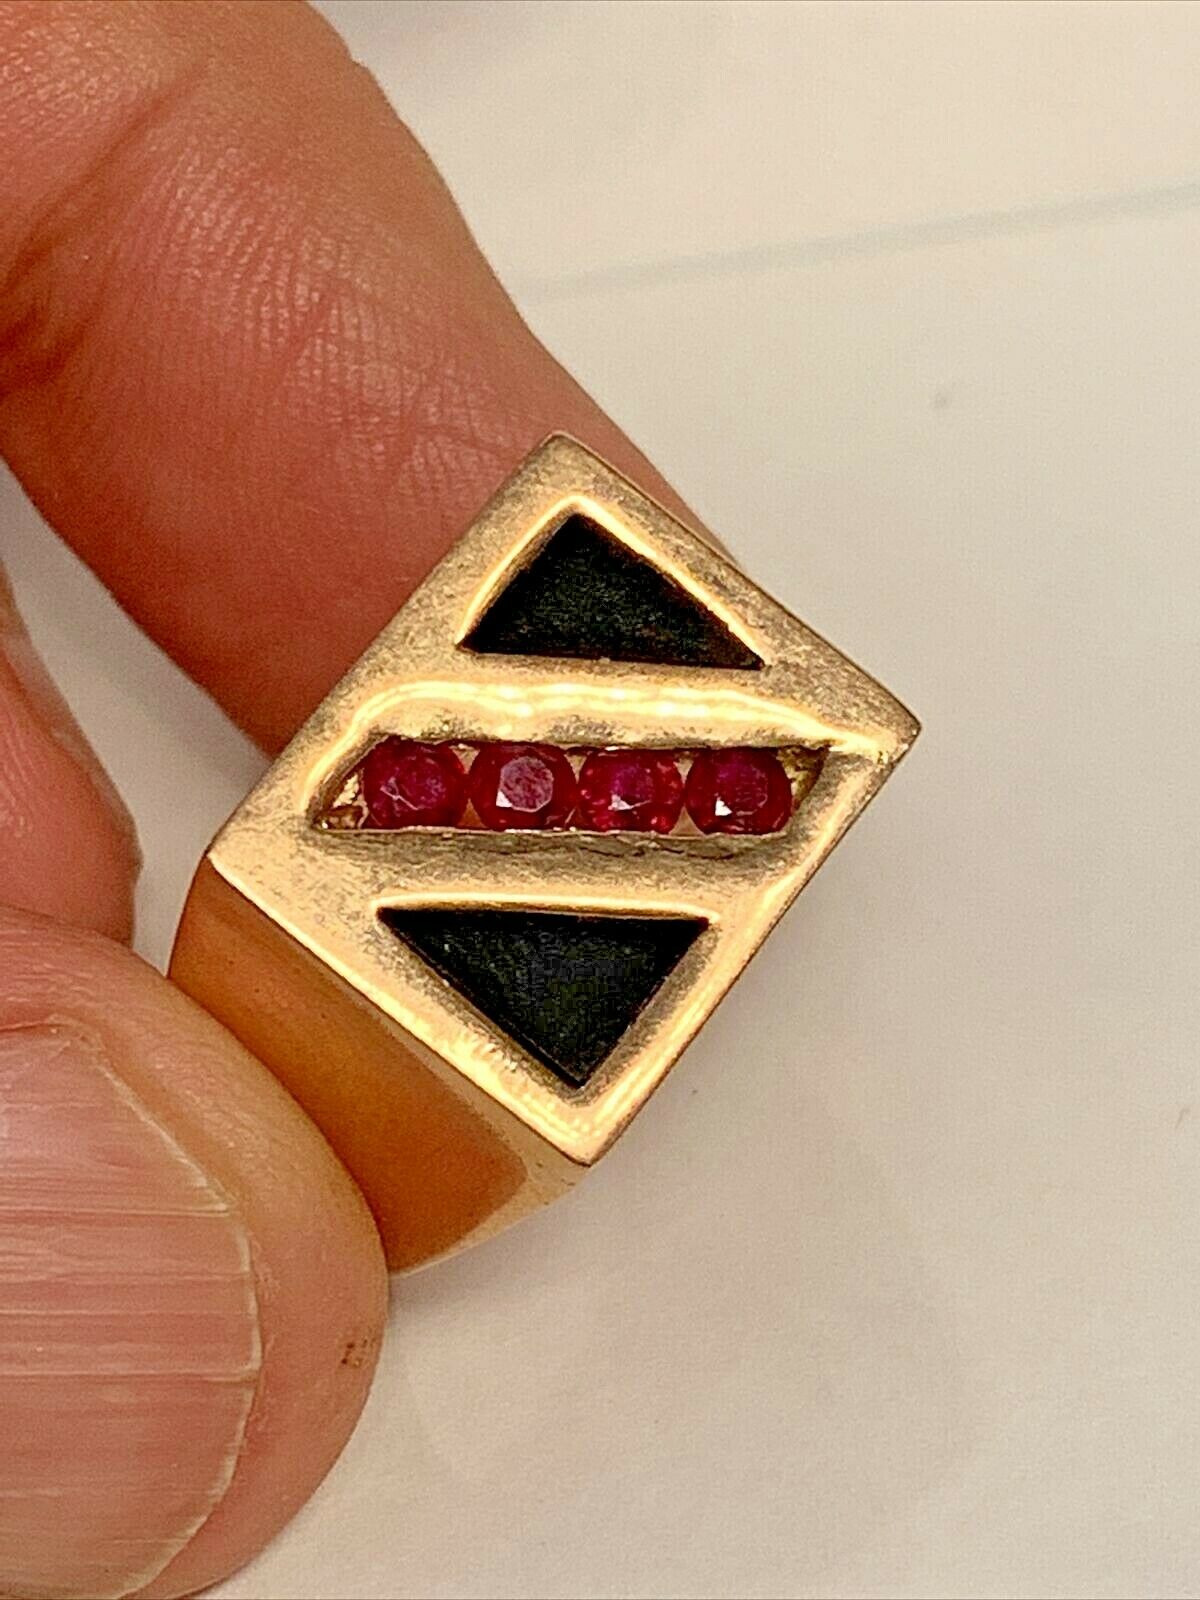 18k 750 Solid Gold Ring Rubies & Onyx Size 9 1/2 - 21.3 Grams